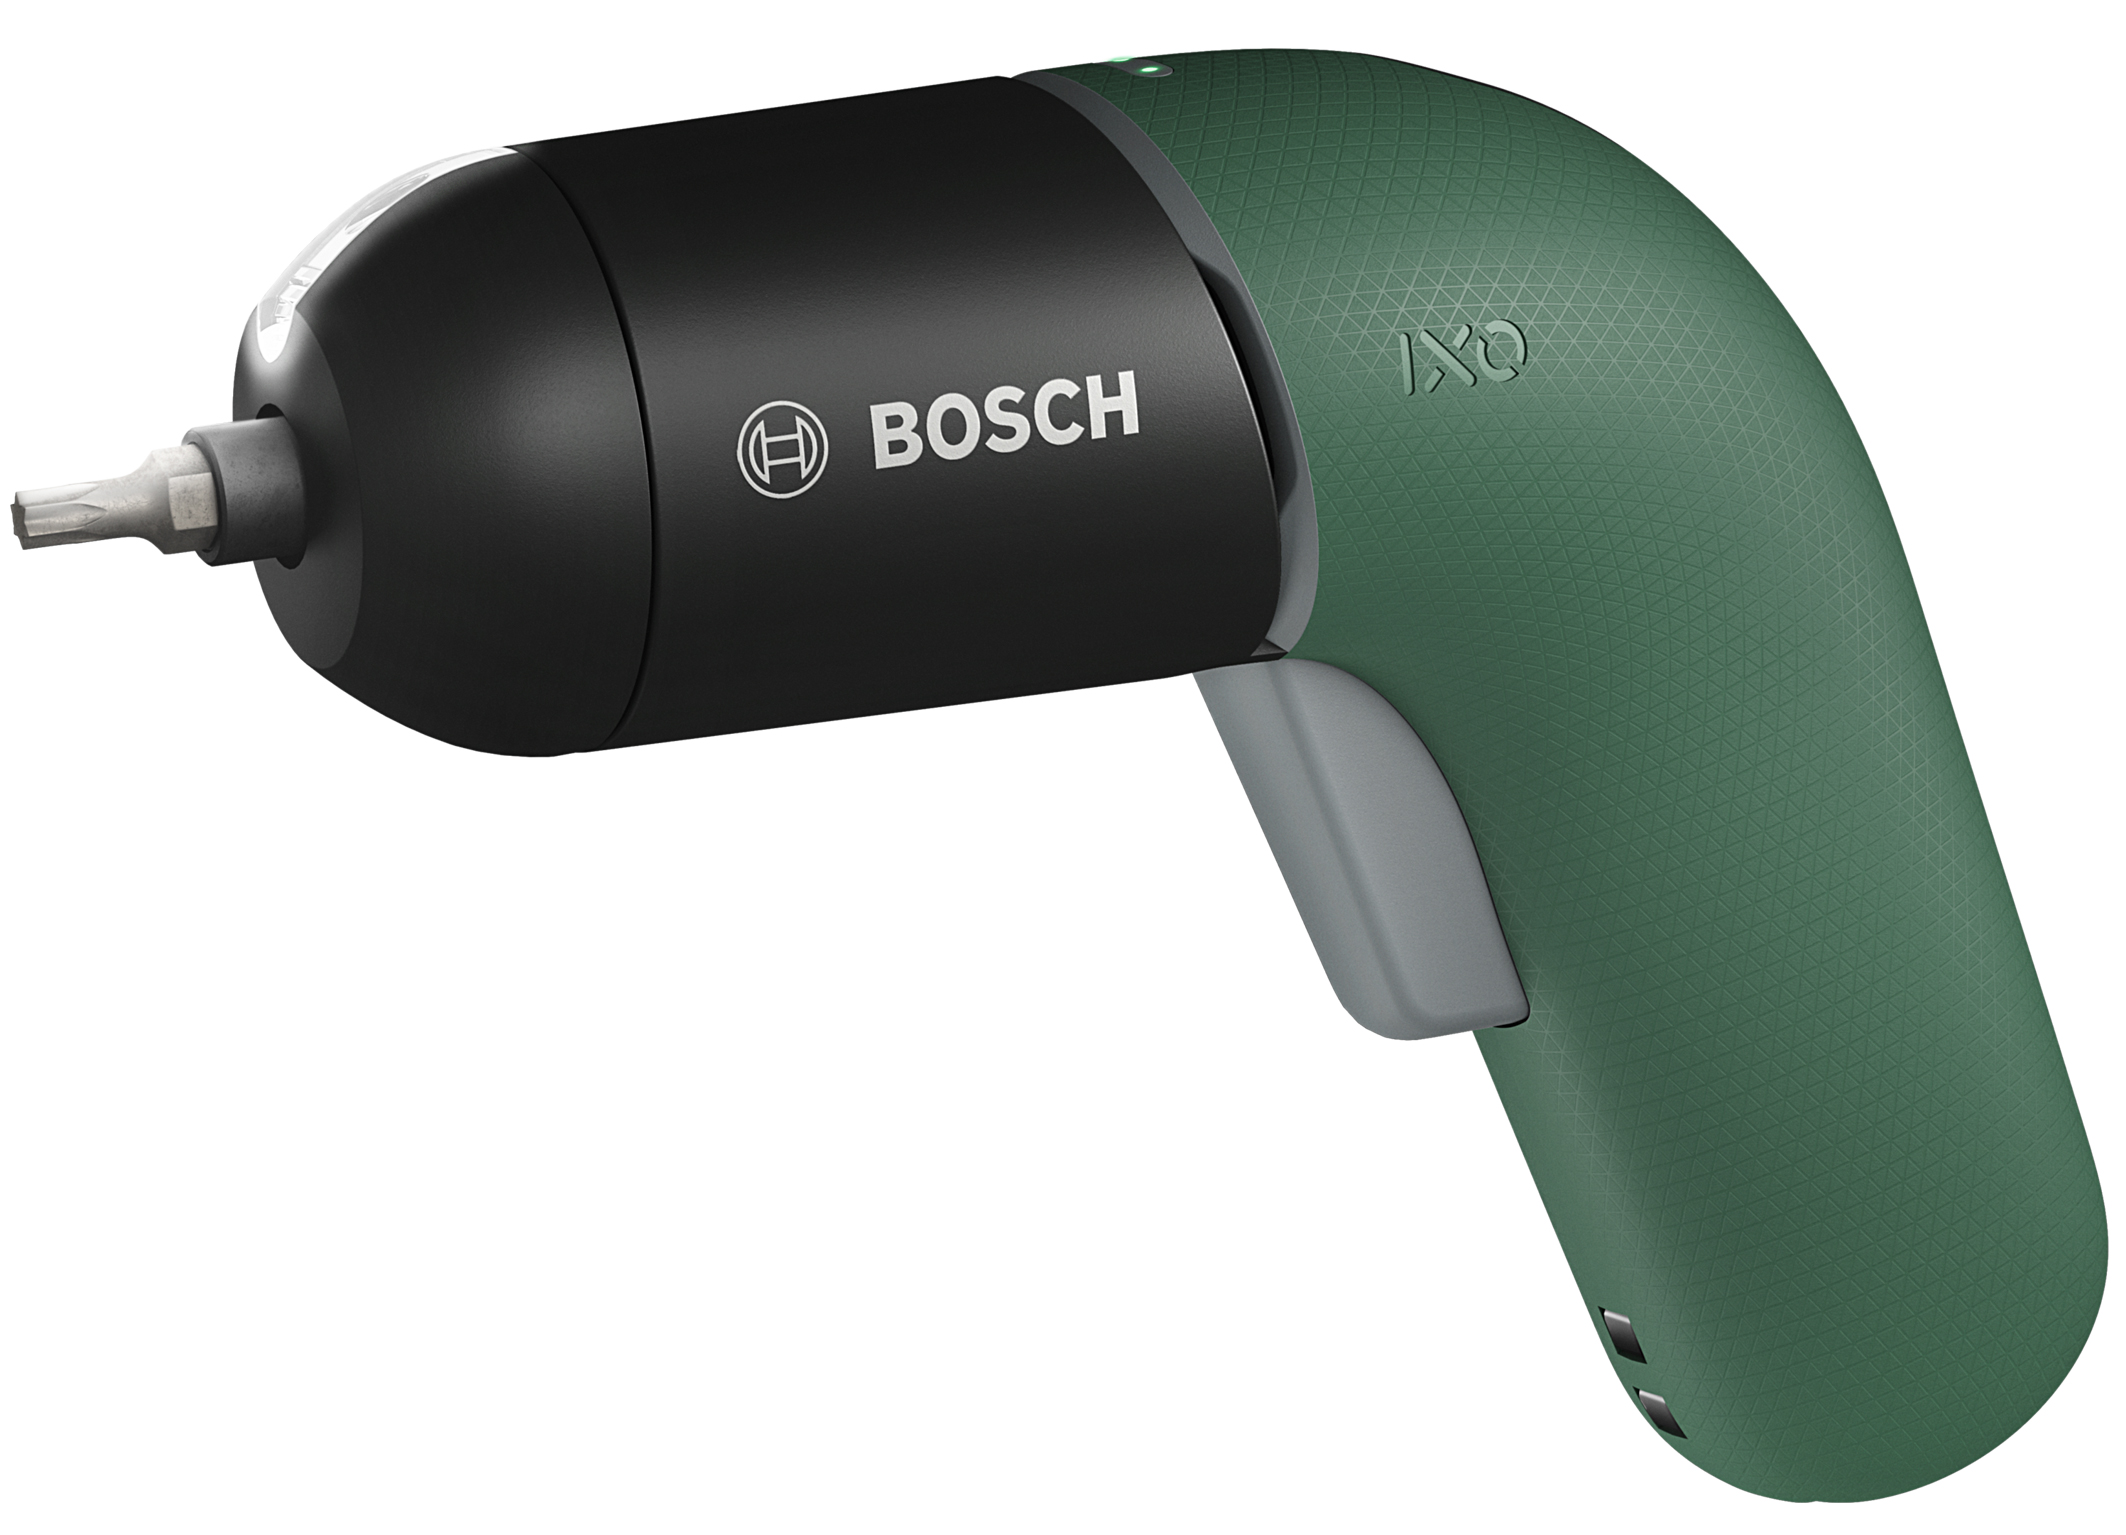 The iconic Screwdriver gets a new look: Bosch is reinventing the Ixo